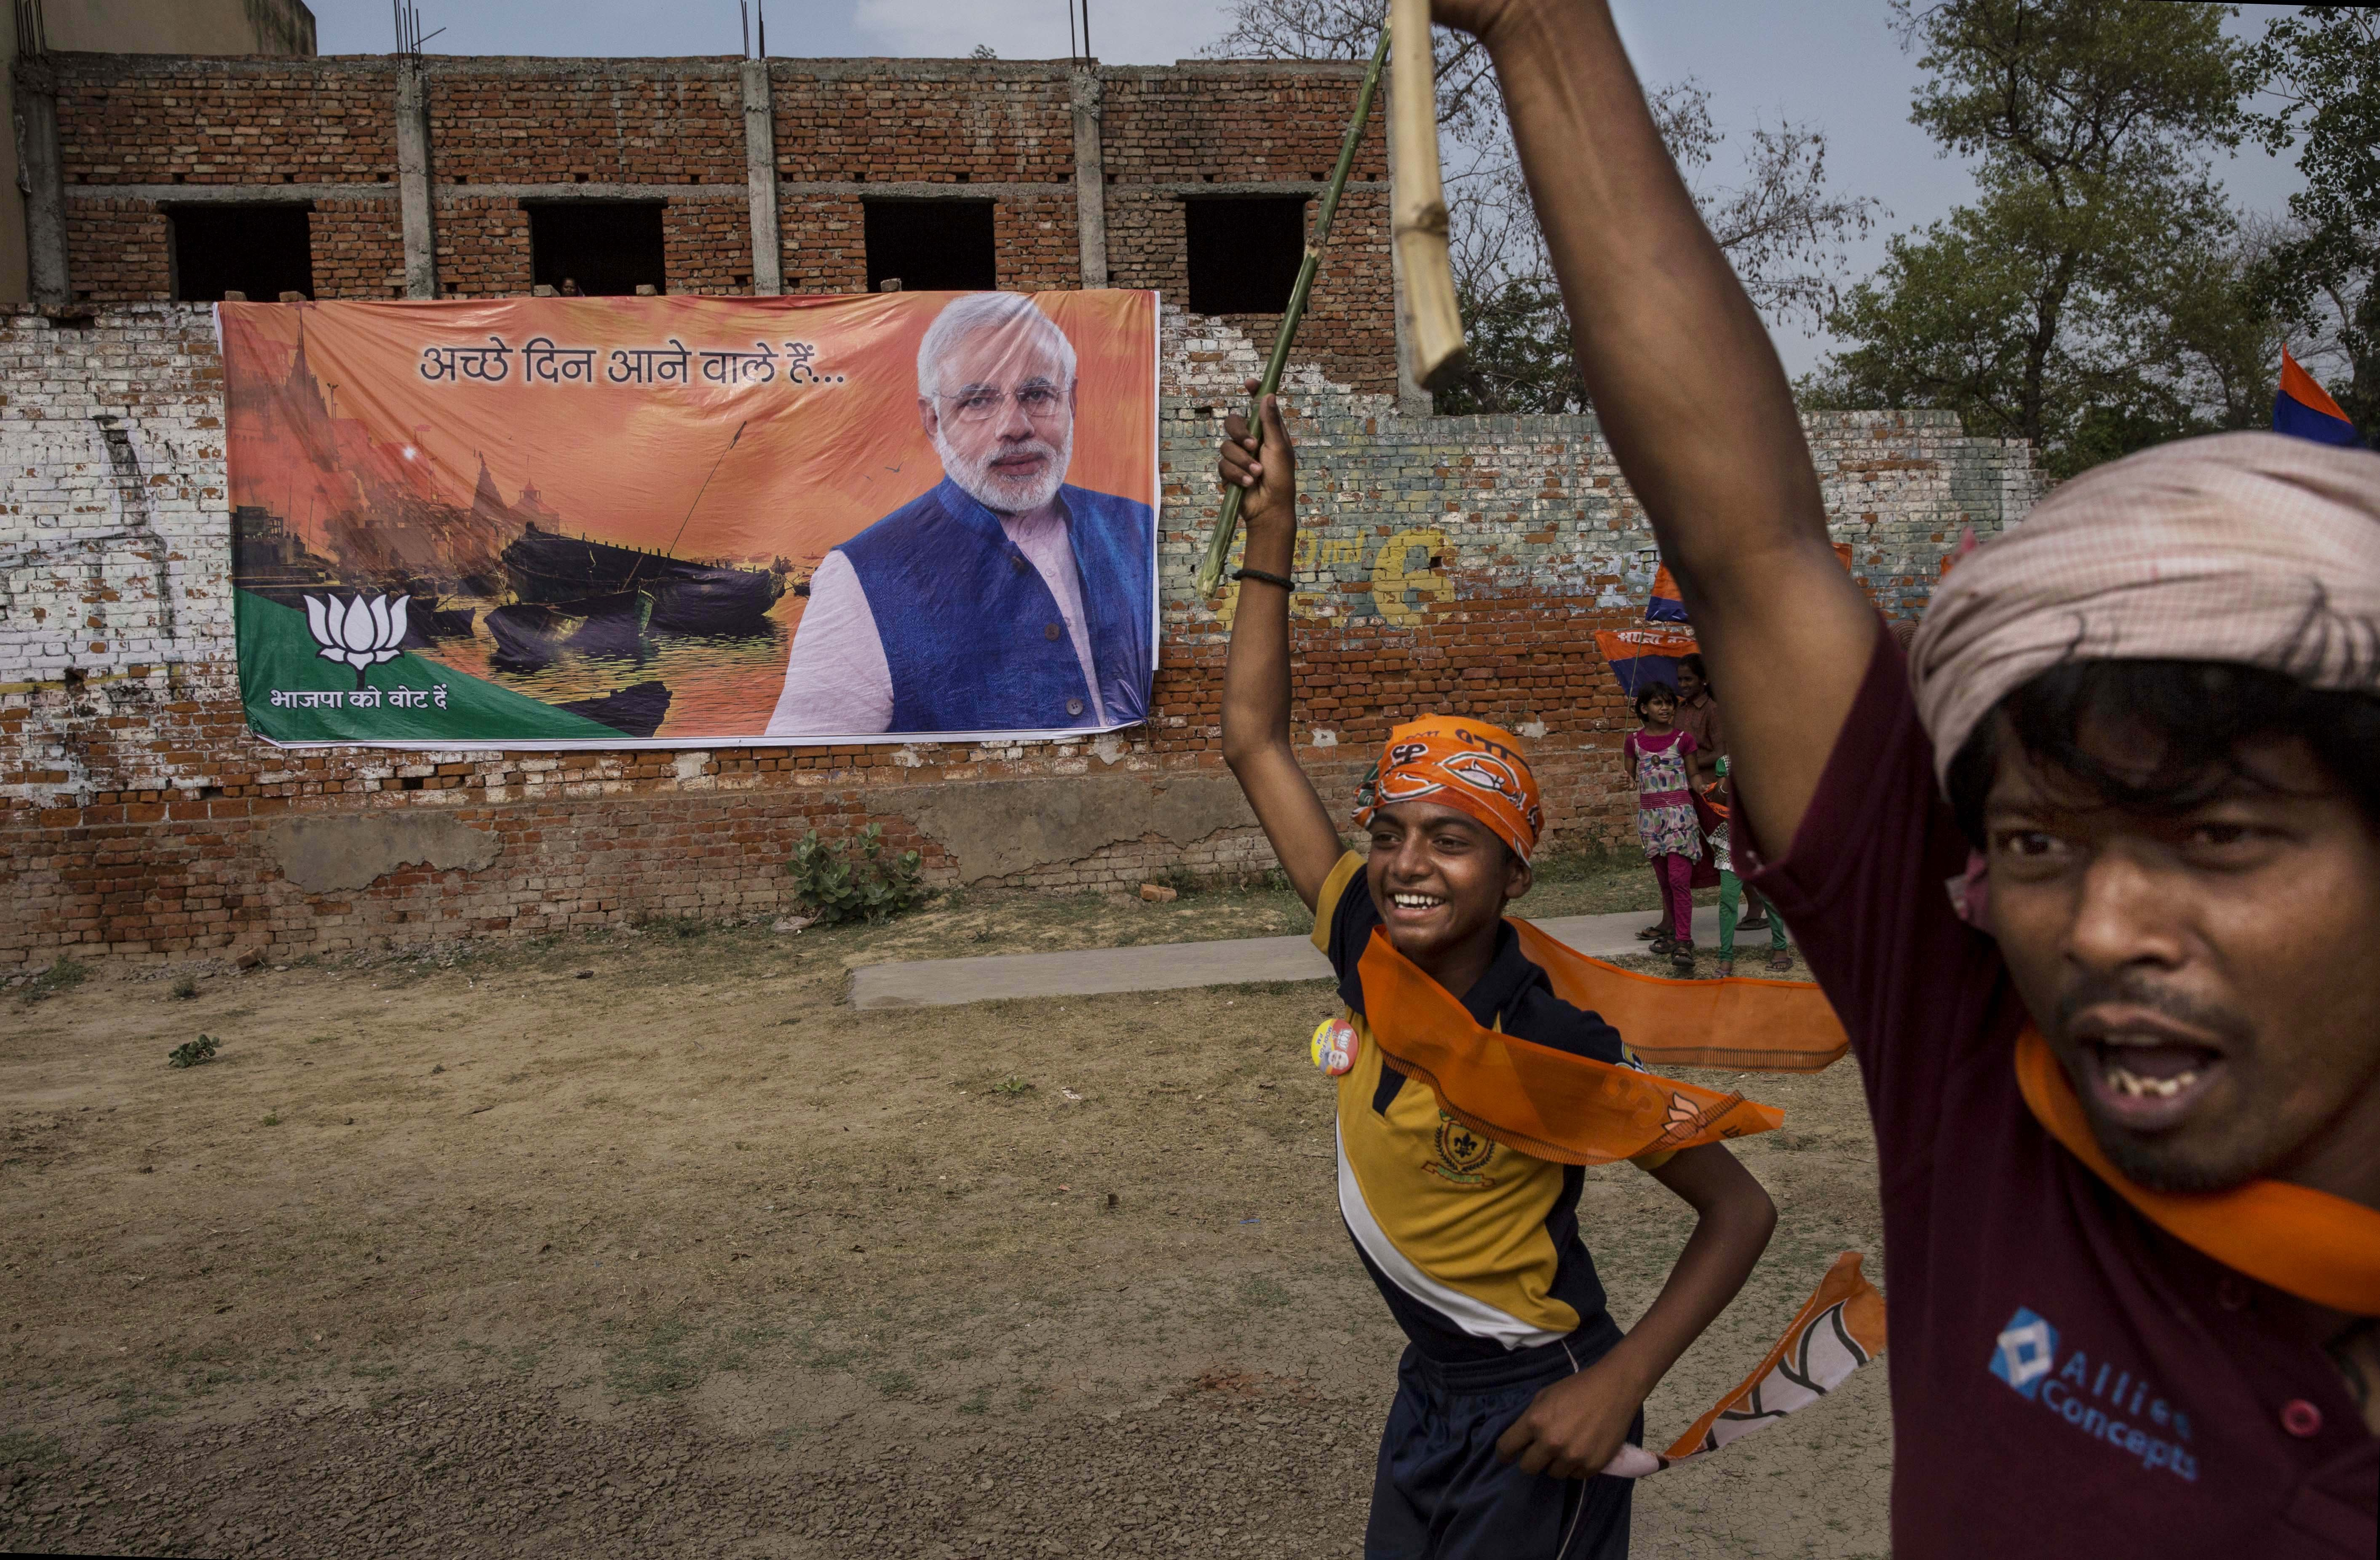 Supporters run past a banner showing BJP leader Narendra Modi at a rally by the leader on May 8, 2014 in Rohaniya, near Varanasi.